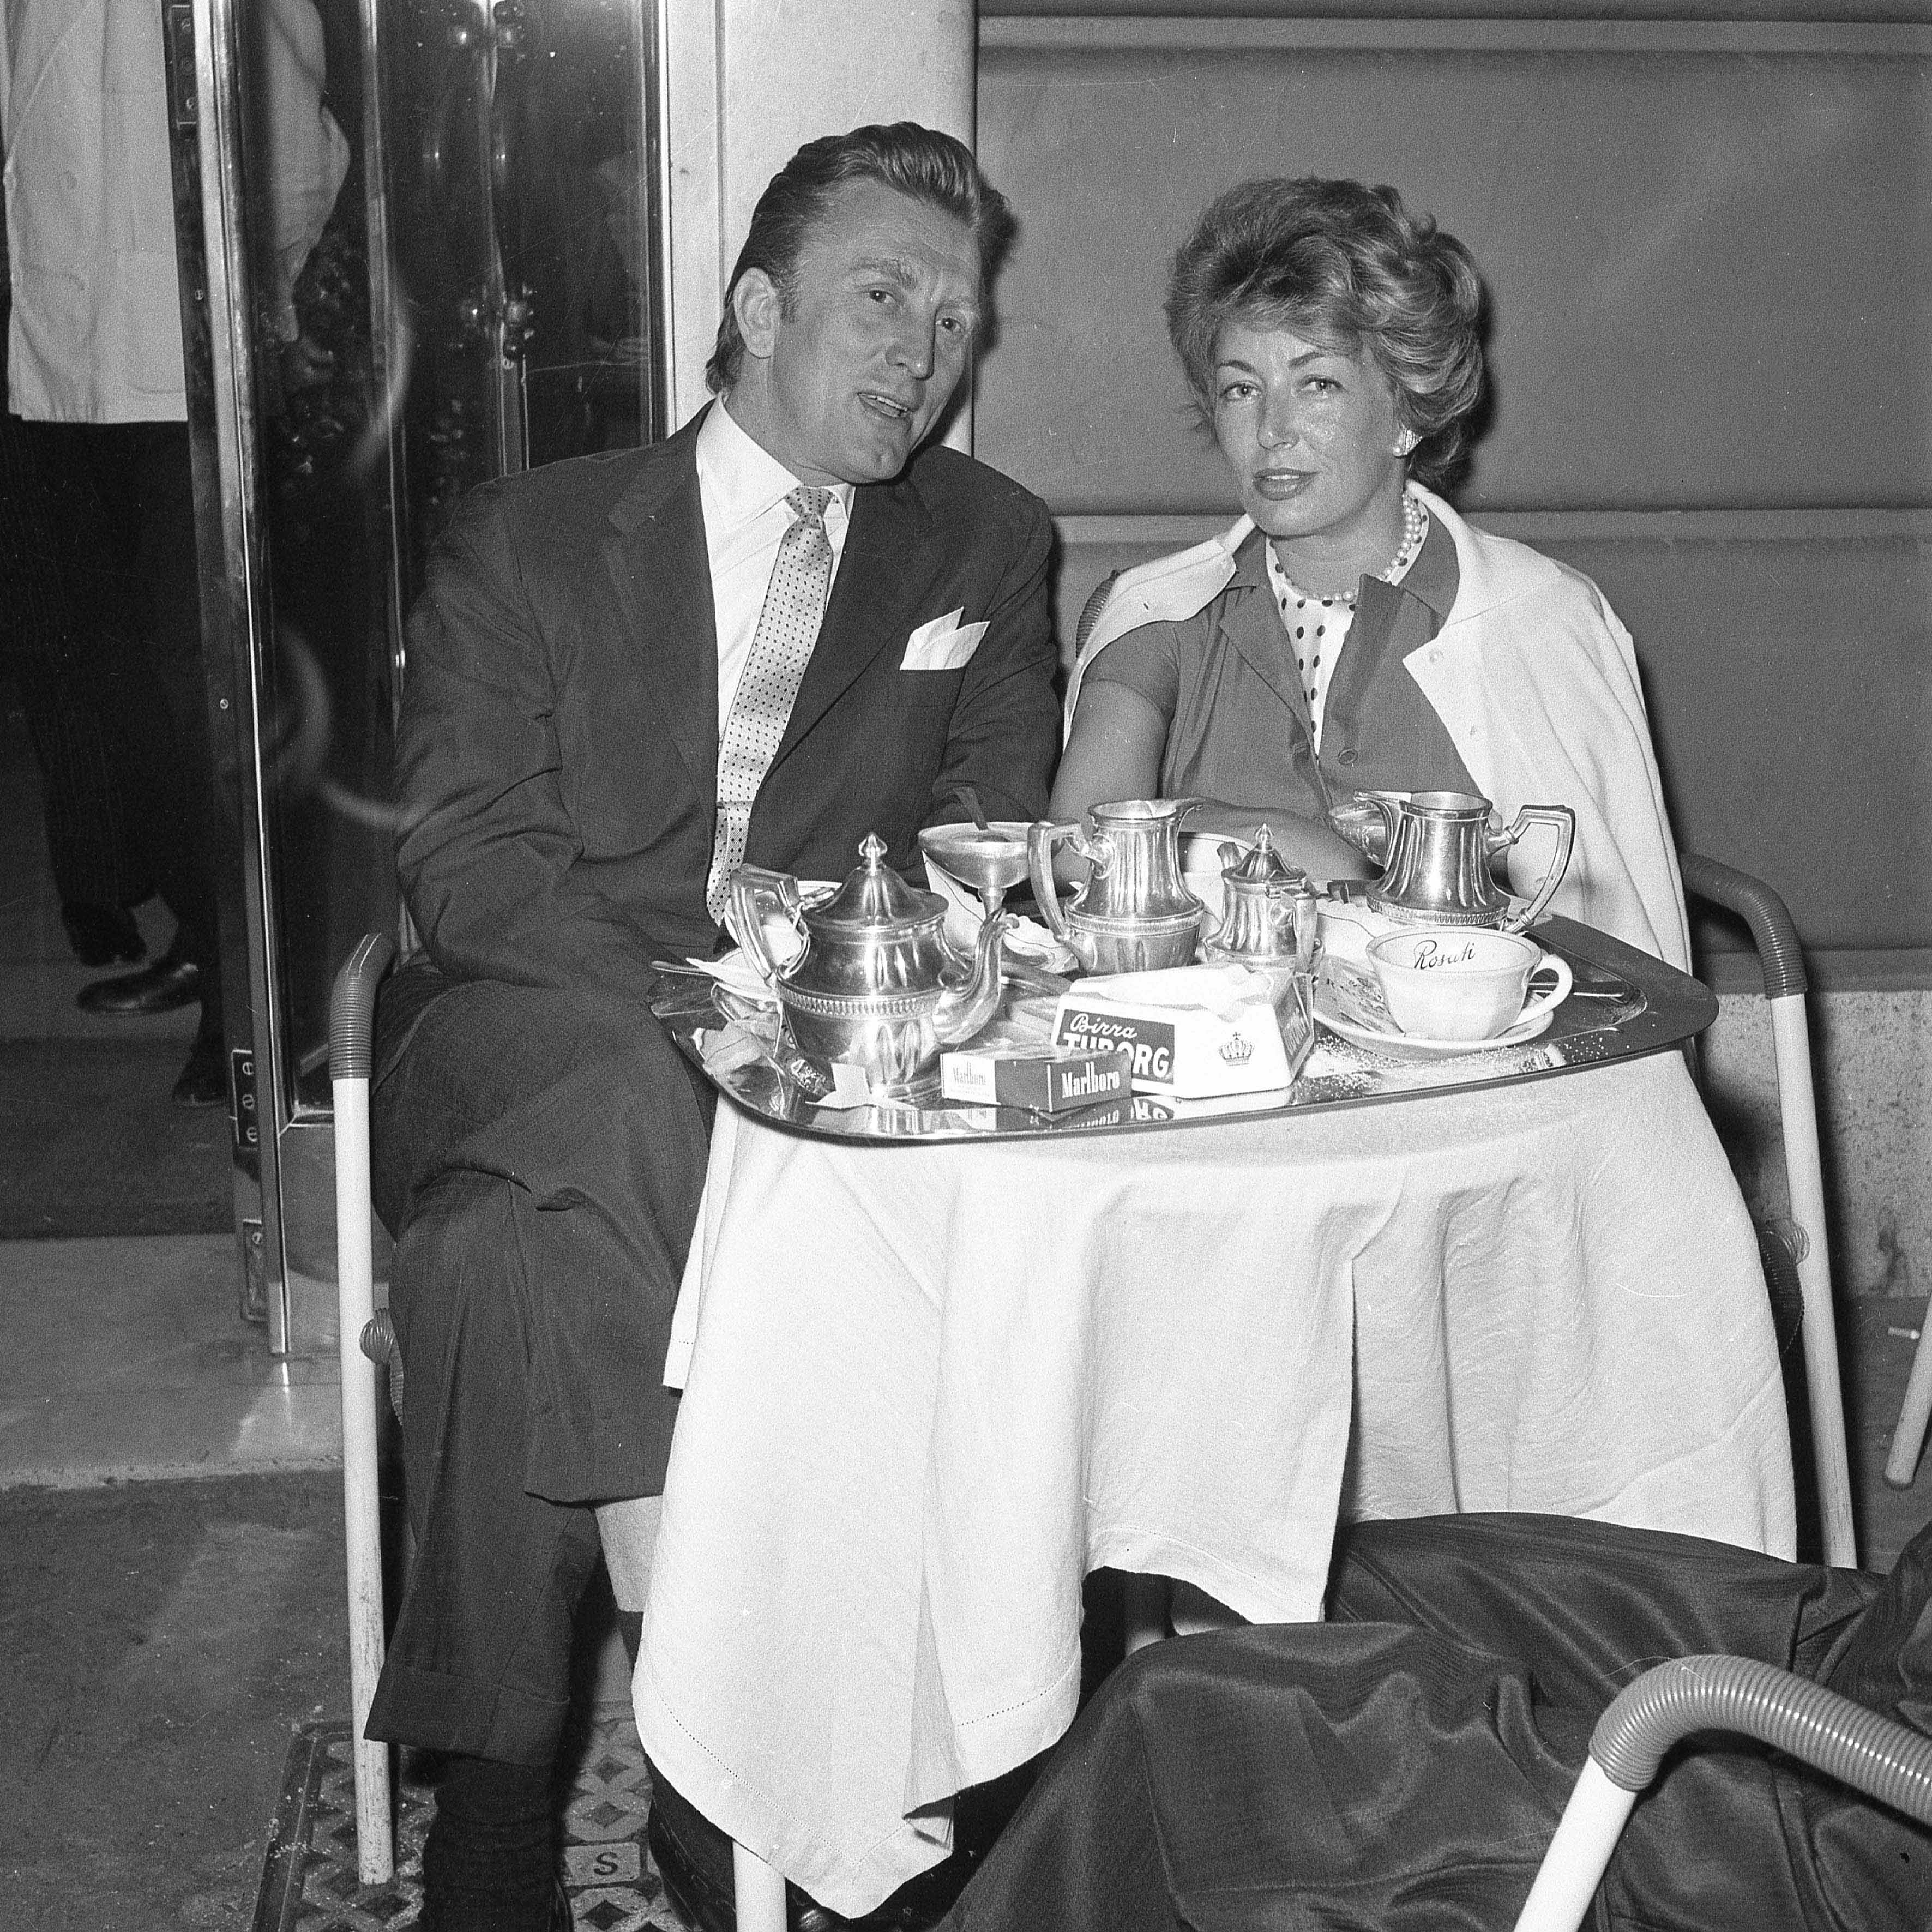 Anne Douglas and her husband Kirk Douglas at the coffee bar in Via Veneto, Rome 1958 | Photo: Getty Images